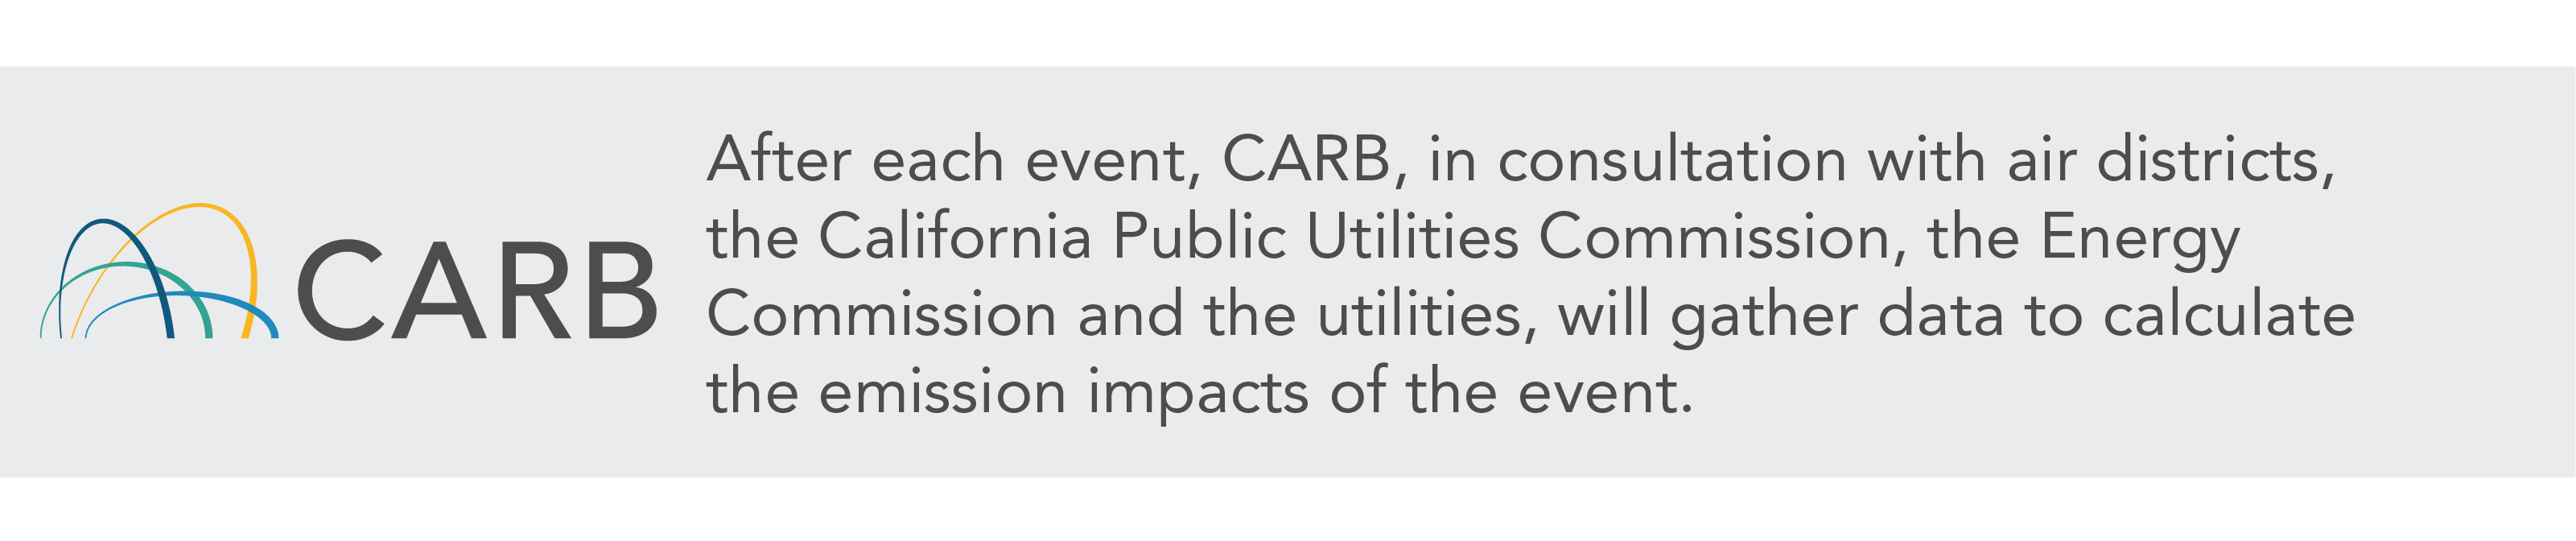 CHIRP step 2 - calculate emissions. After each event, CARB, in consultation with air districts, the California Public Utilities Commission, the Energy Commission and the utilities, will gather data to calculate the emission impacts of the event. 